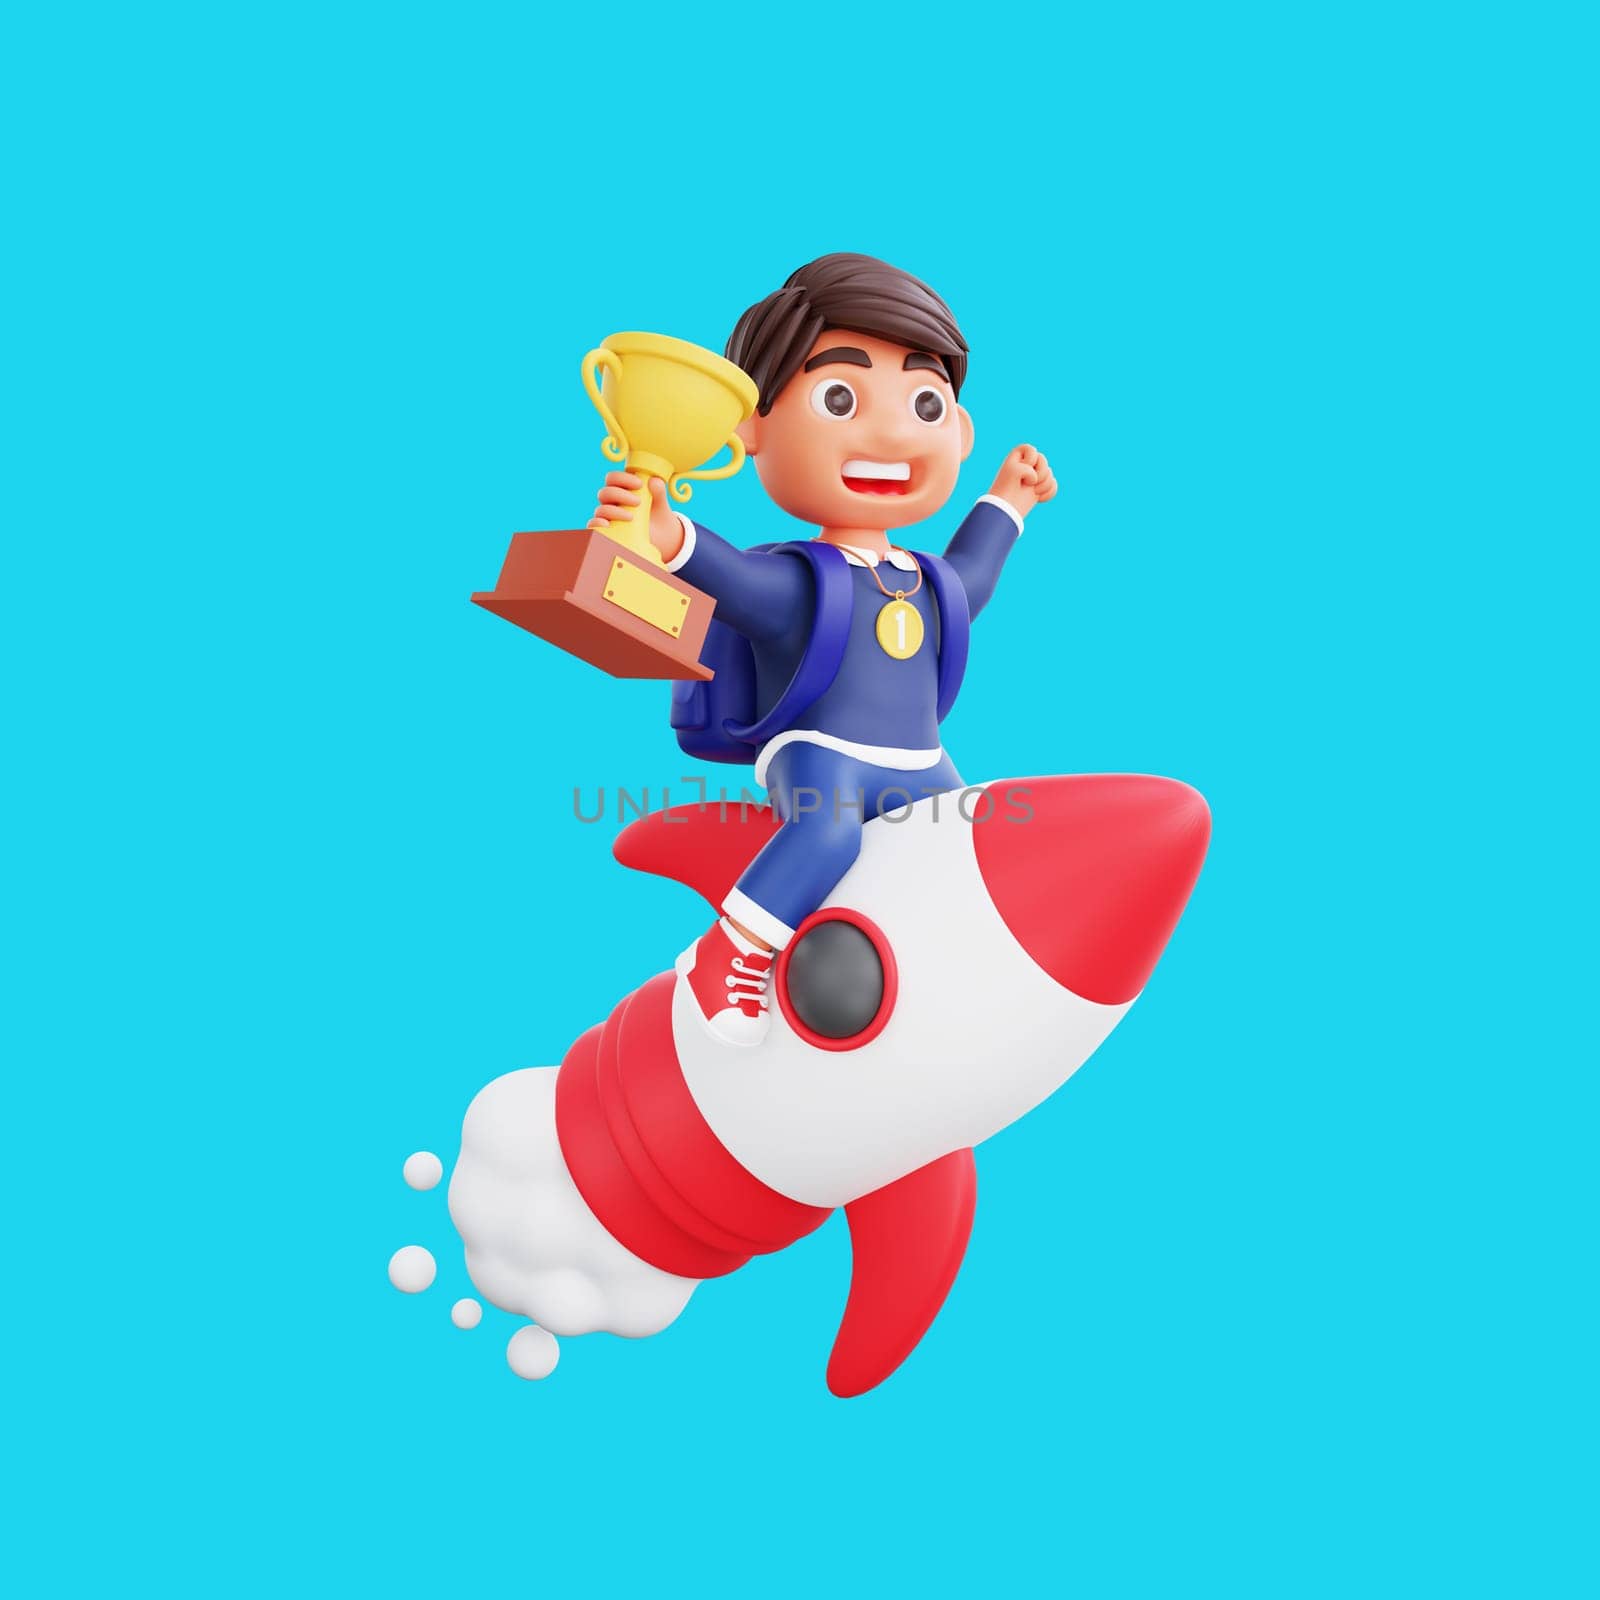 3d cute character champion get trophy and medal flying on a rocket Back to school concept by Rahmat_Djayusman